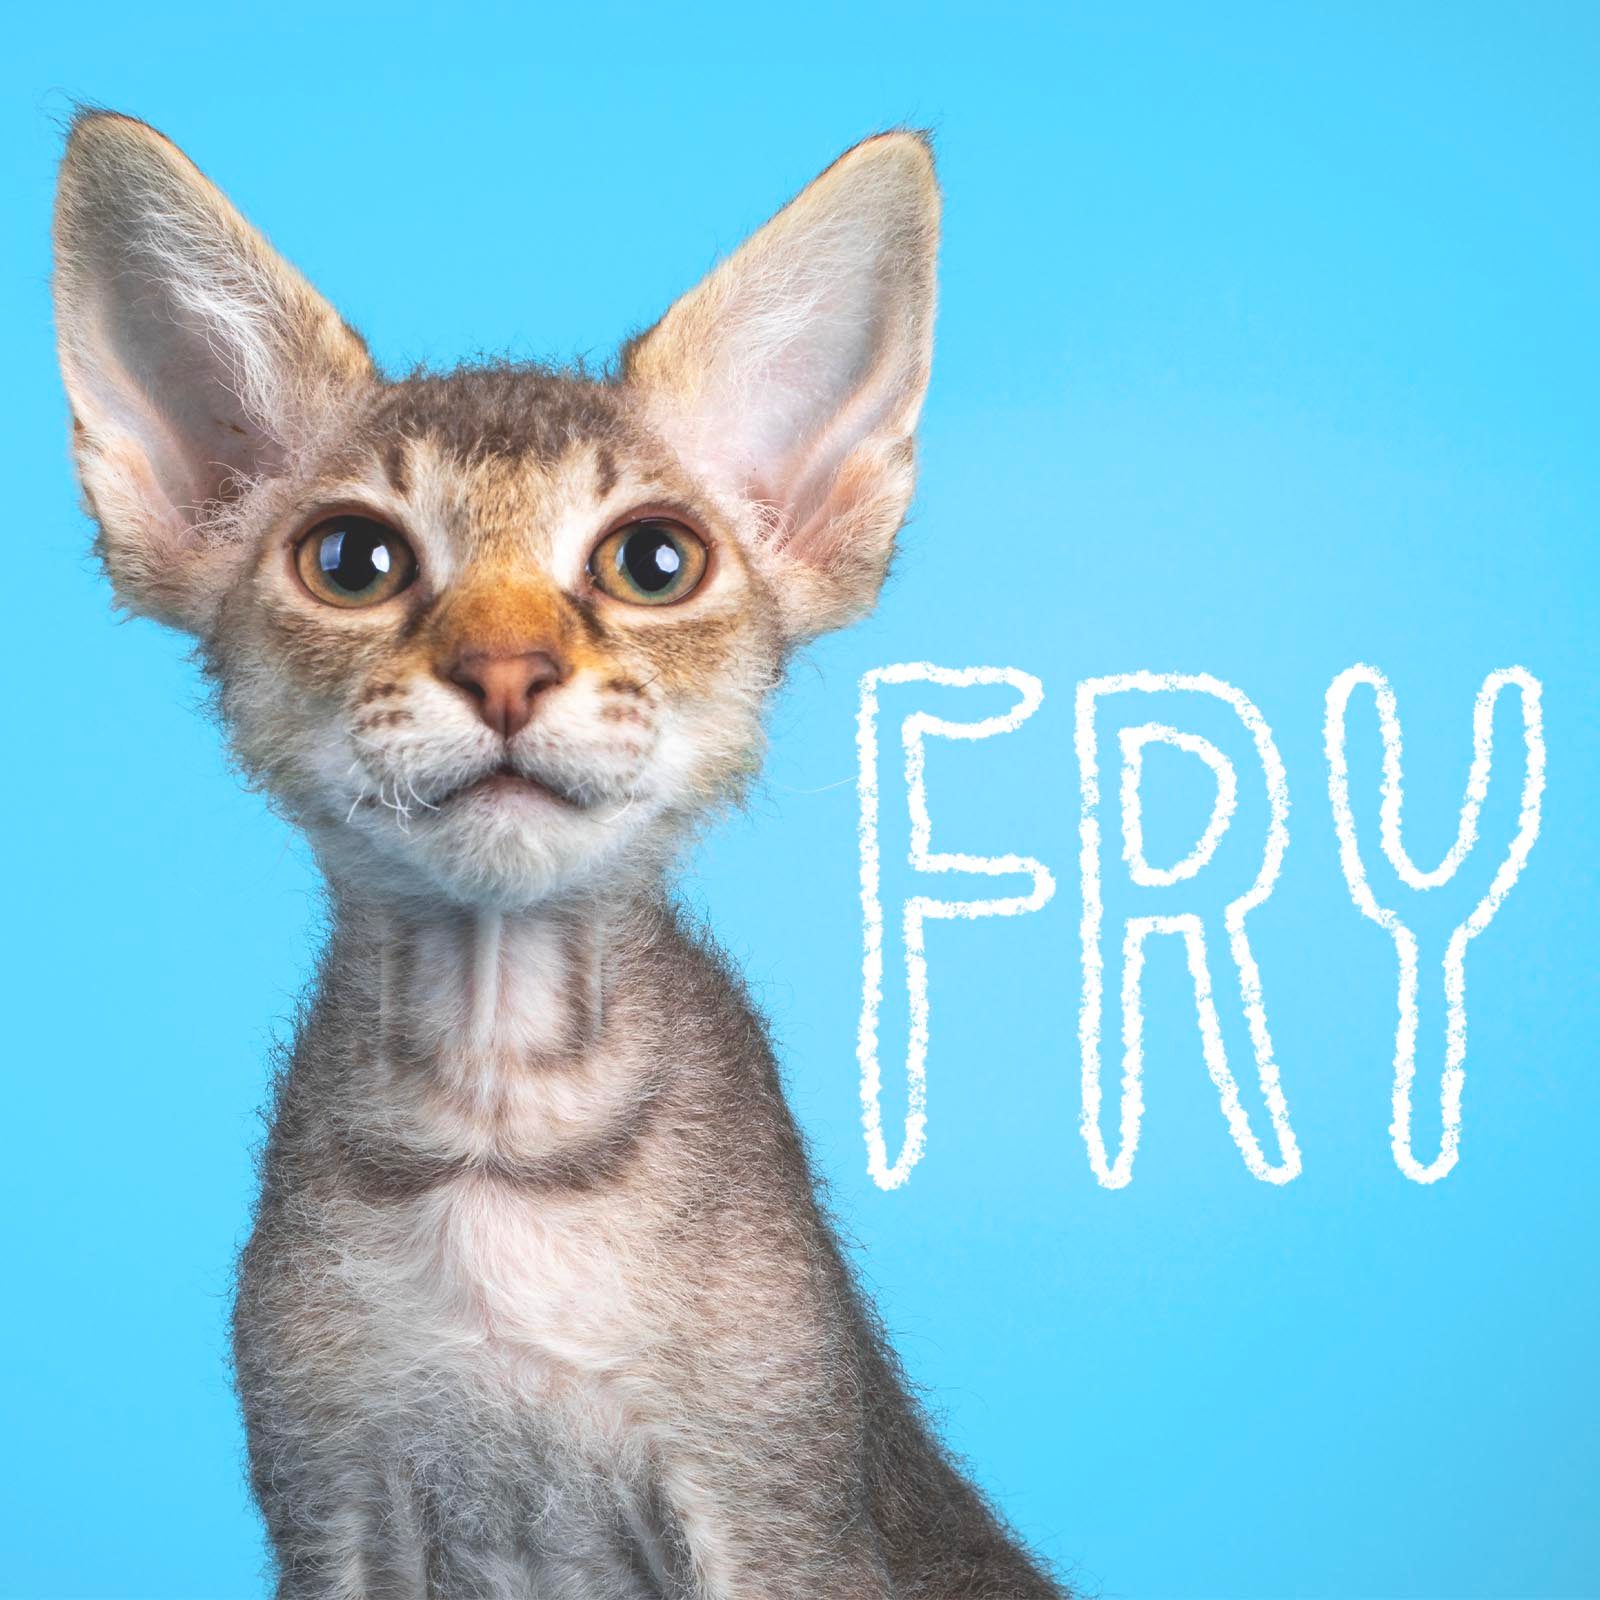 Boy cat name "Fry" handwritten on a photo of a cat on a blue background